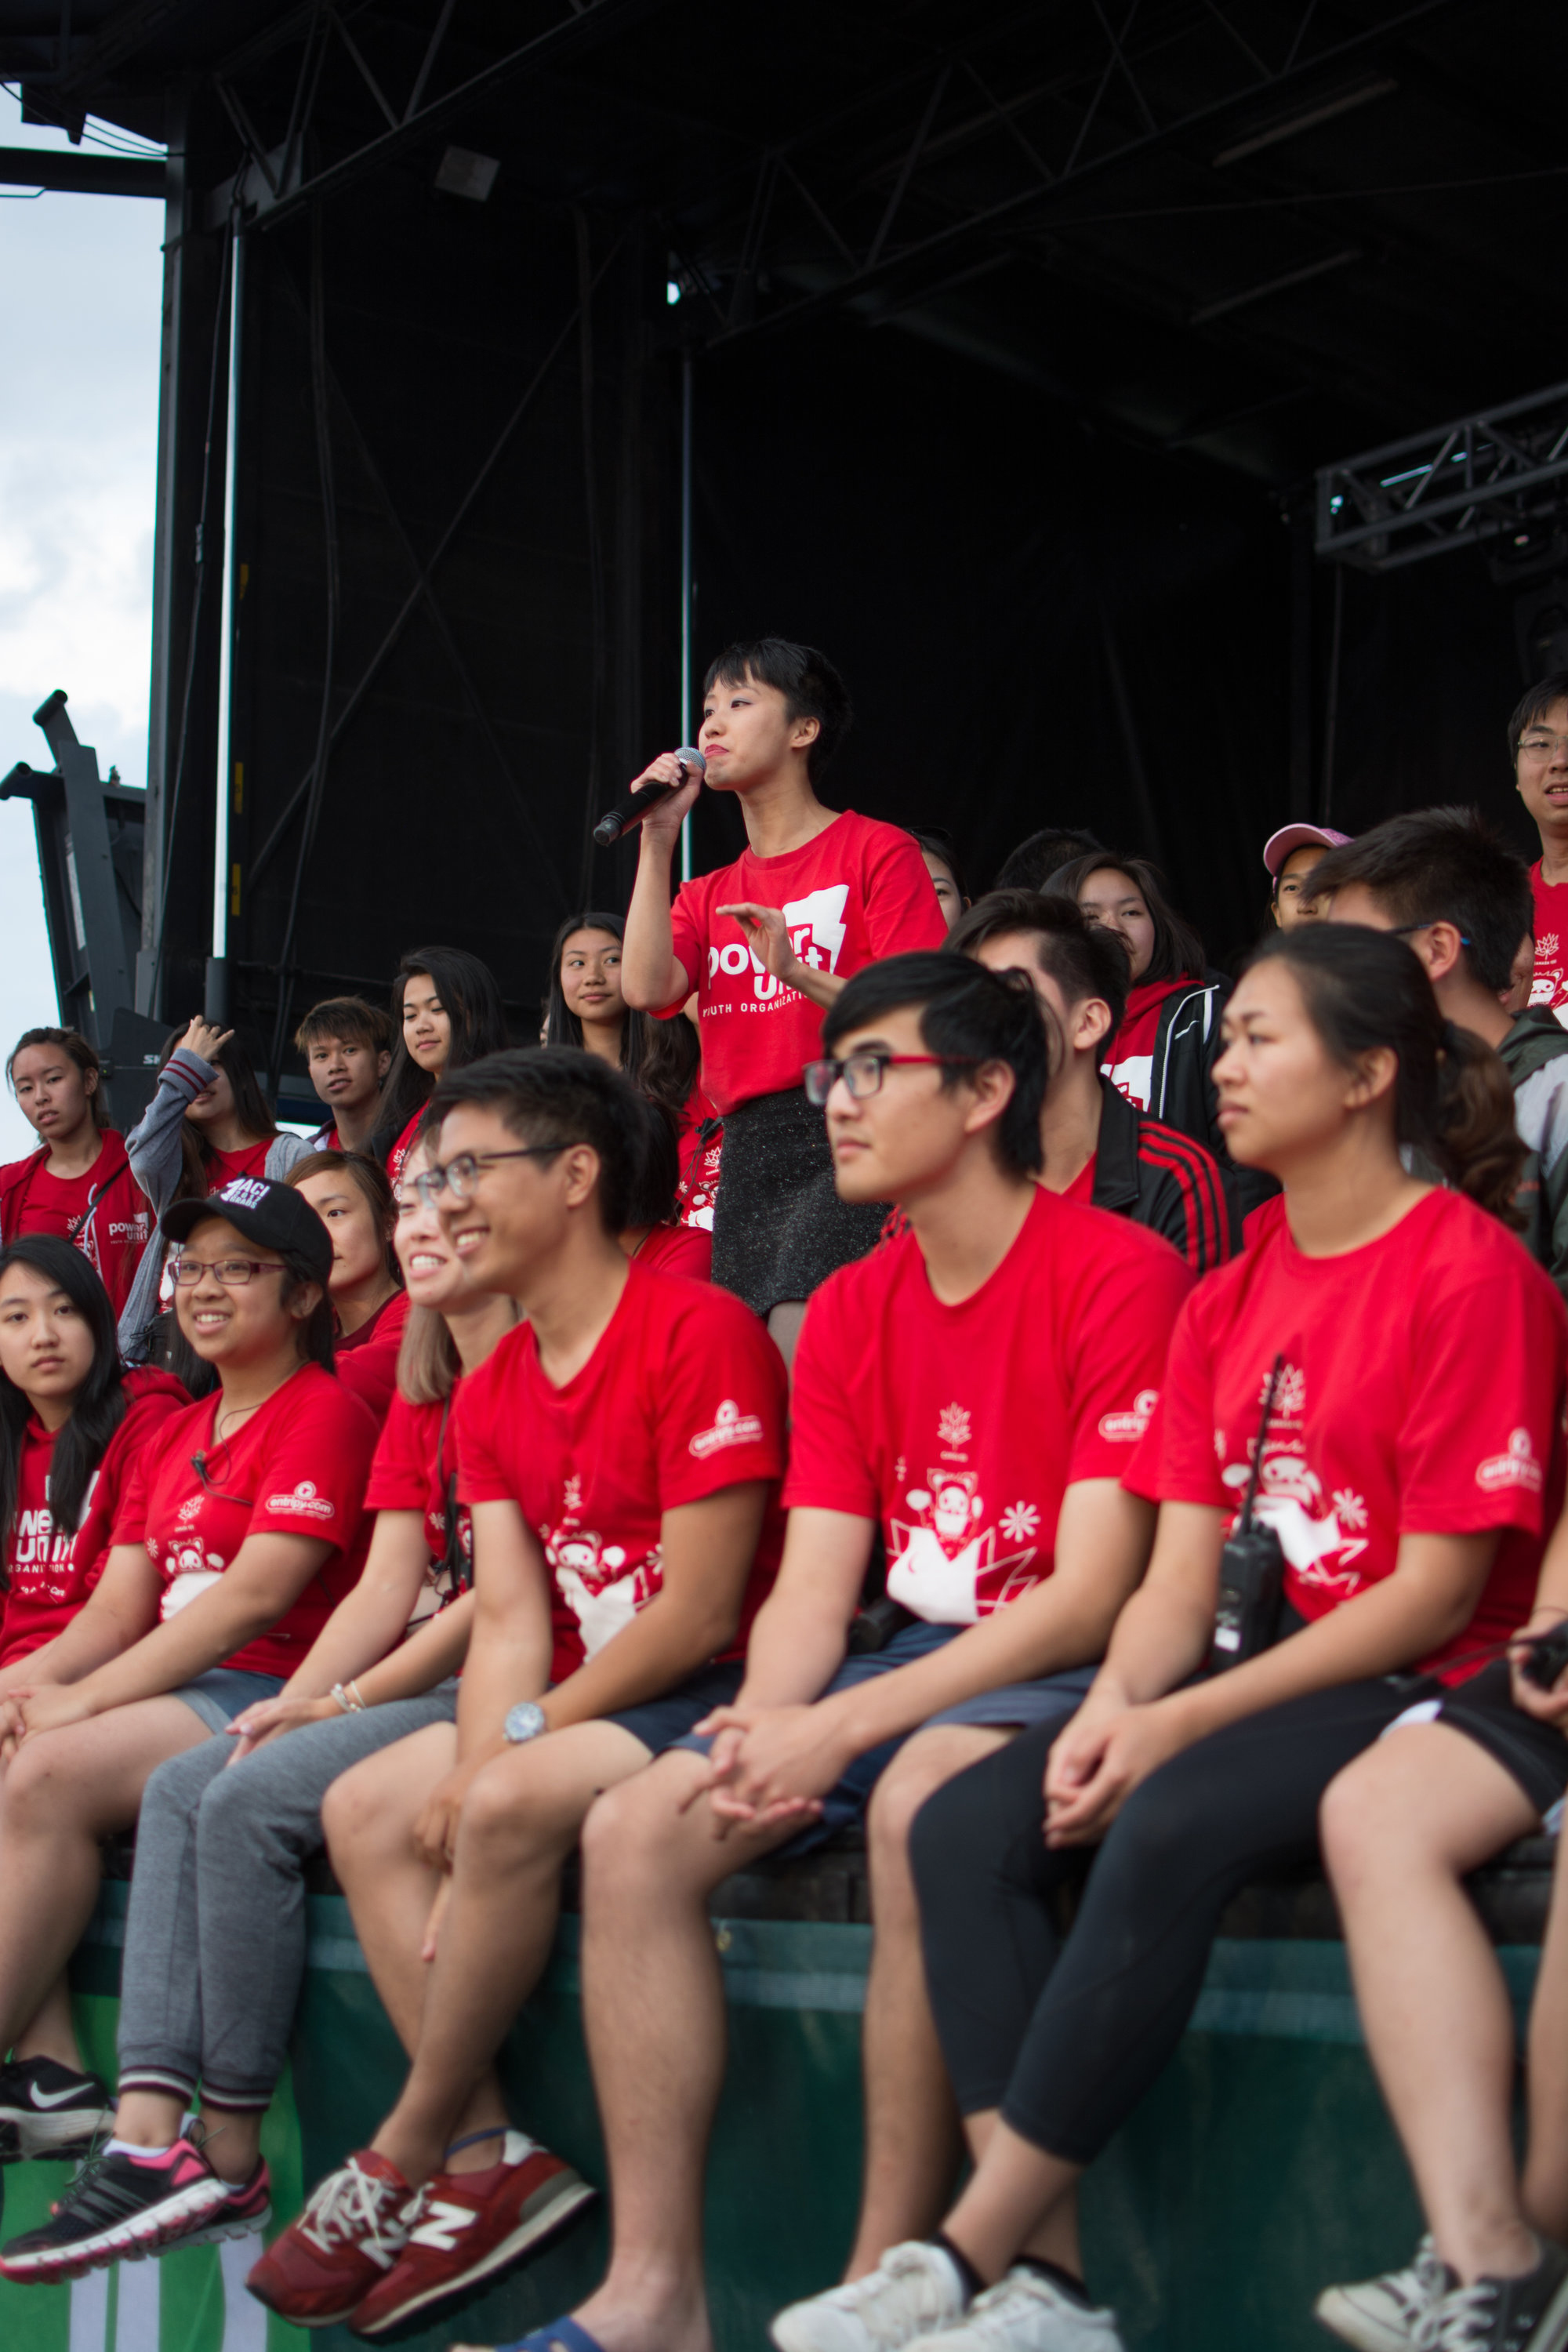 Group of participants at a charity event wearing red custom printed t-shirts.